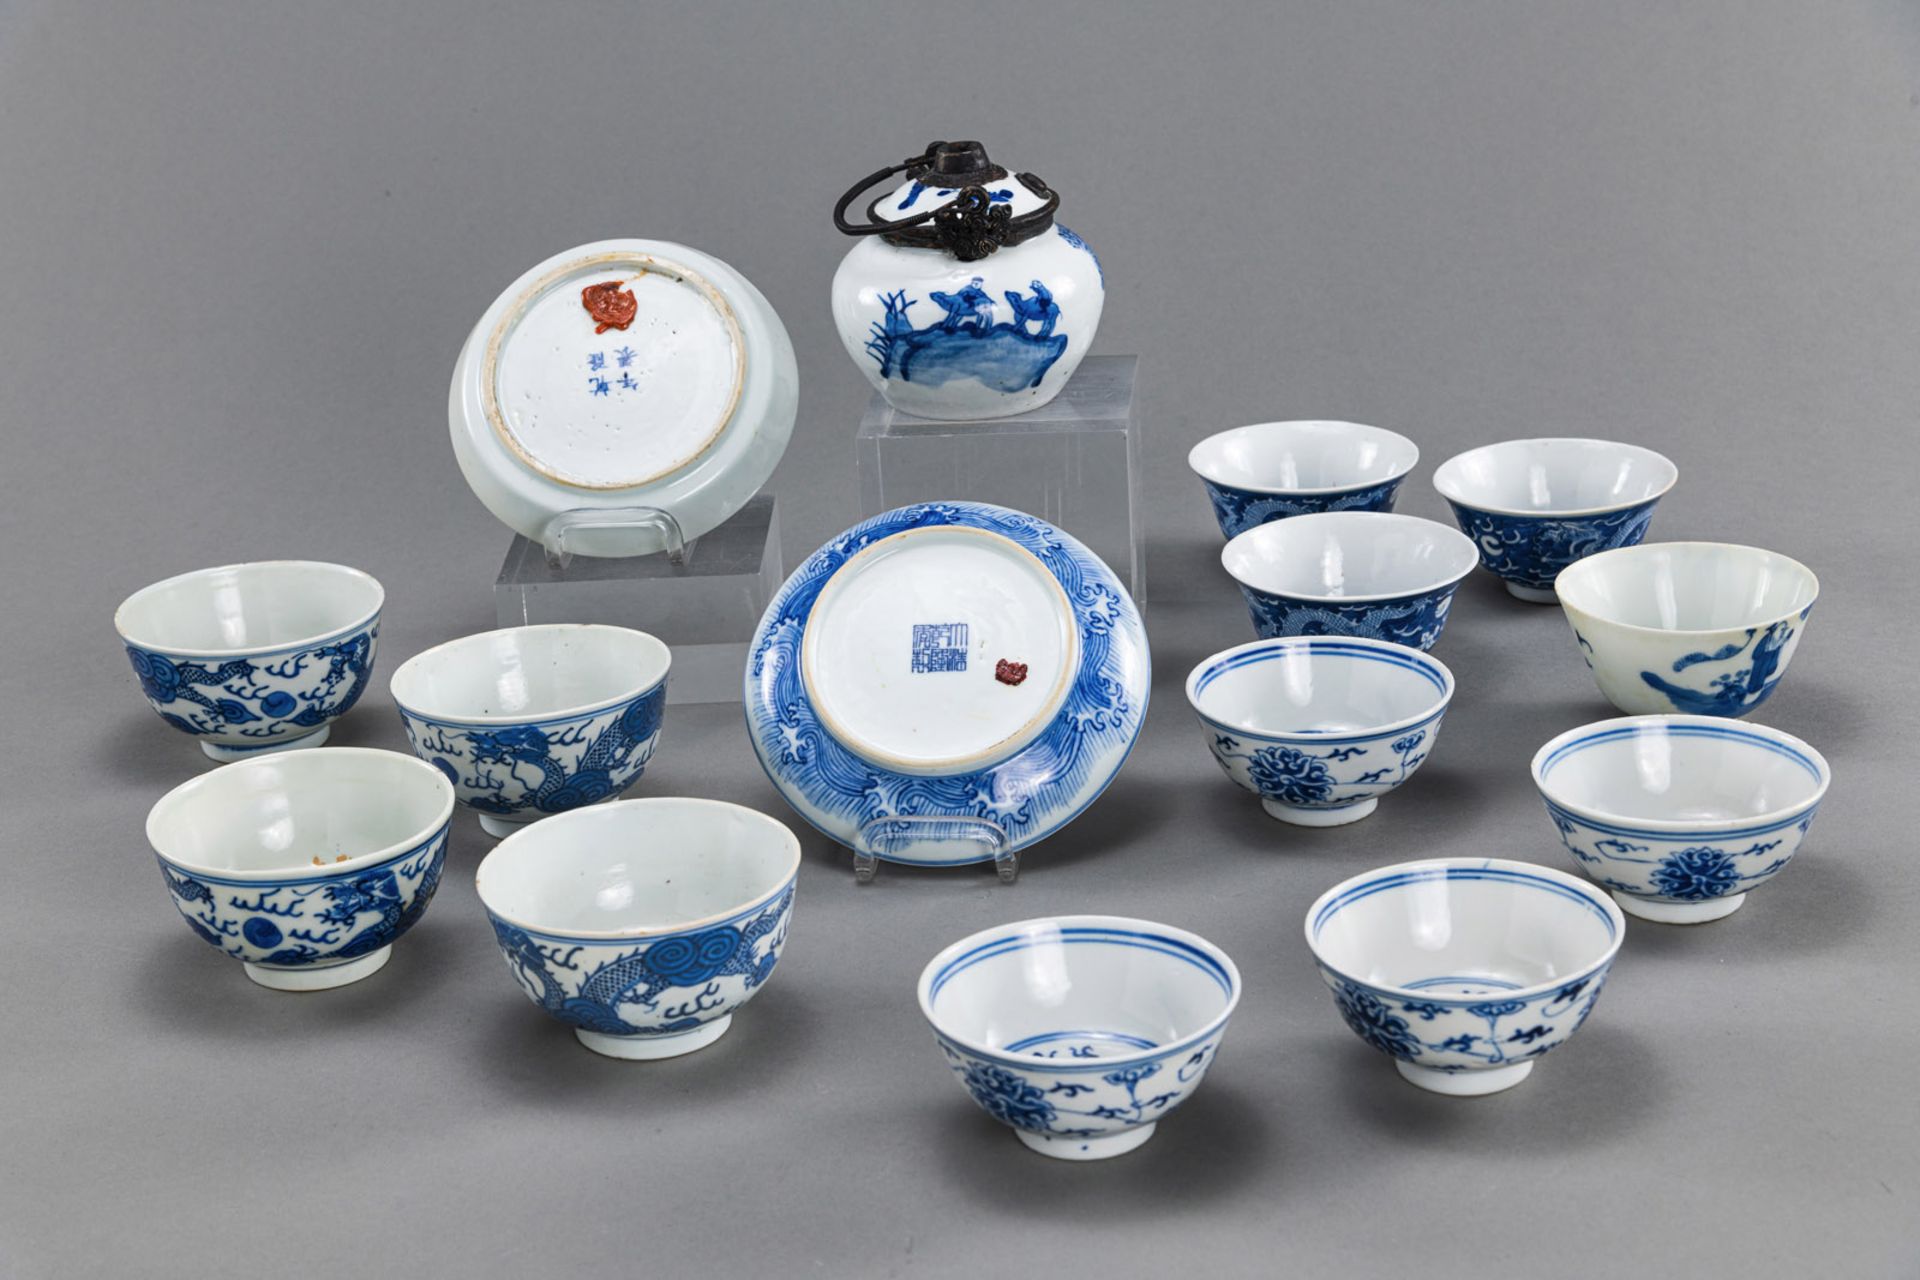 A GROUP OF 15 BLUE AND WHITE PORCELAIN BOWLS AND DISHES - Image 2 of 4